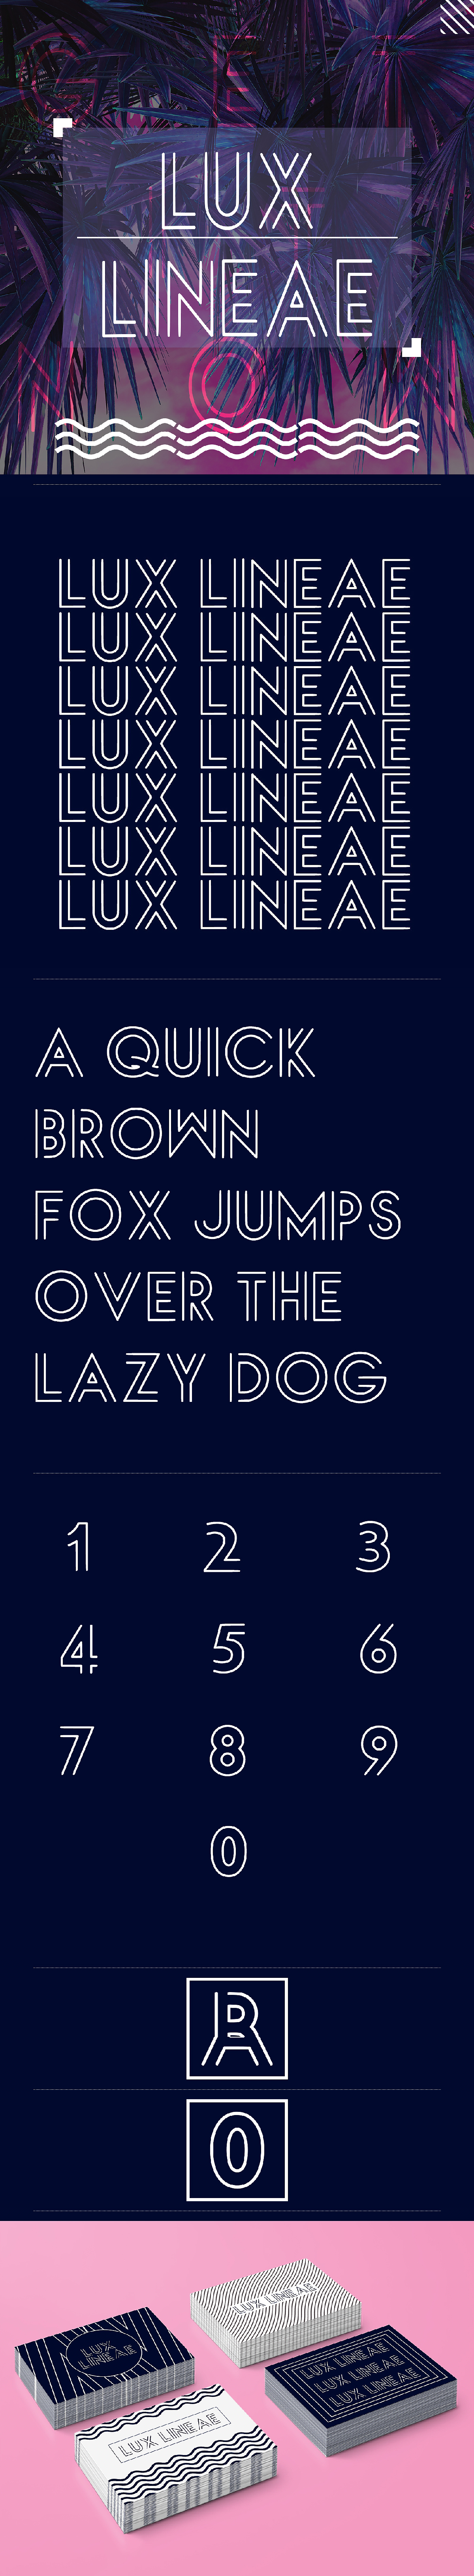 Lux Lineae Free Display Font